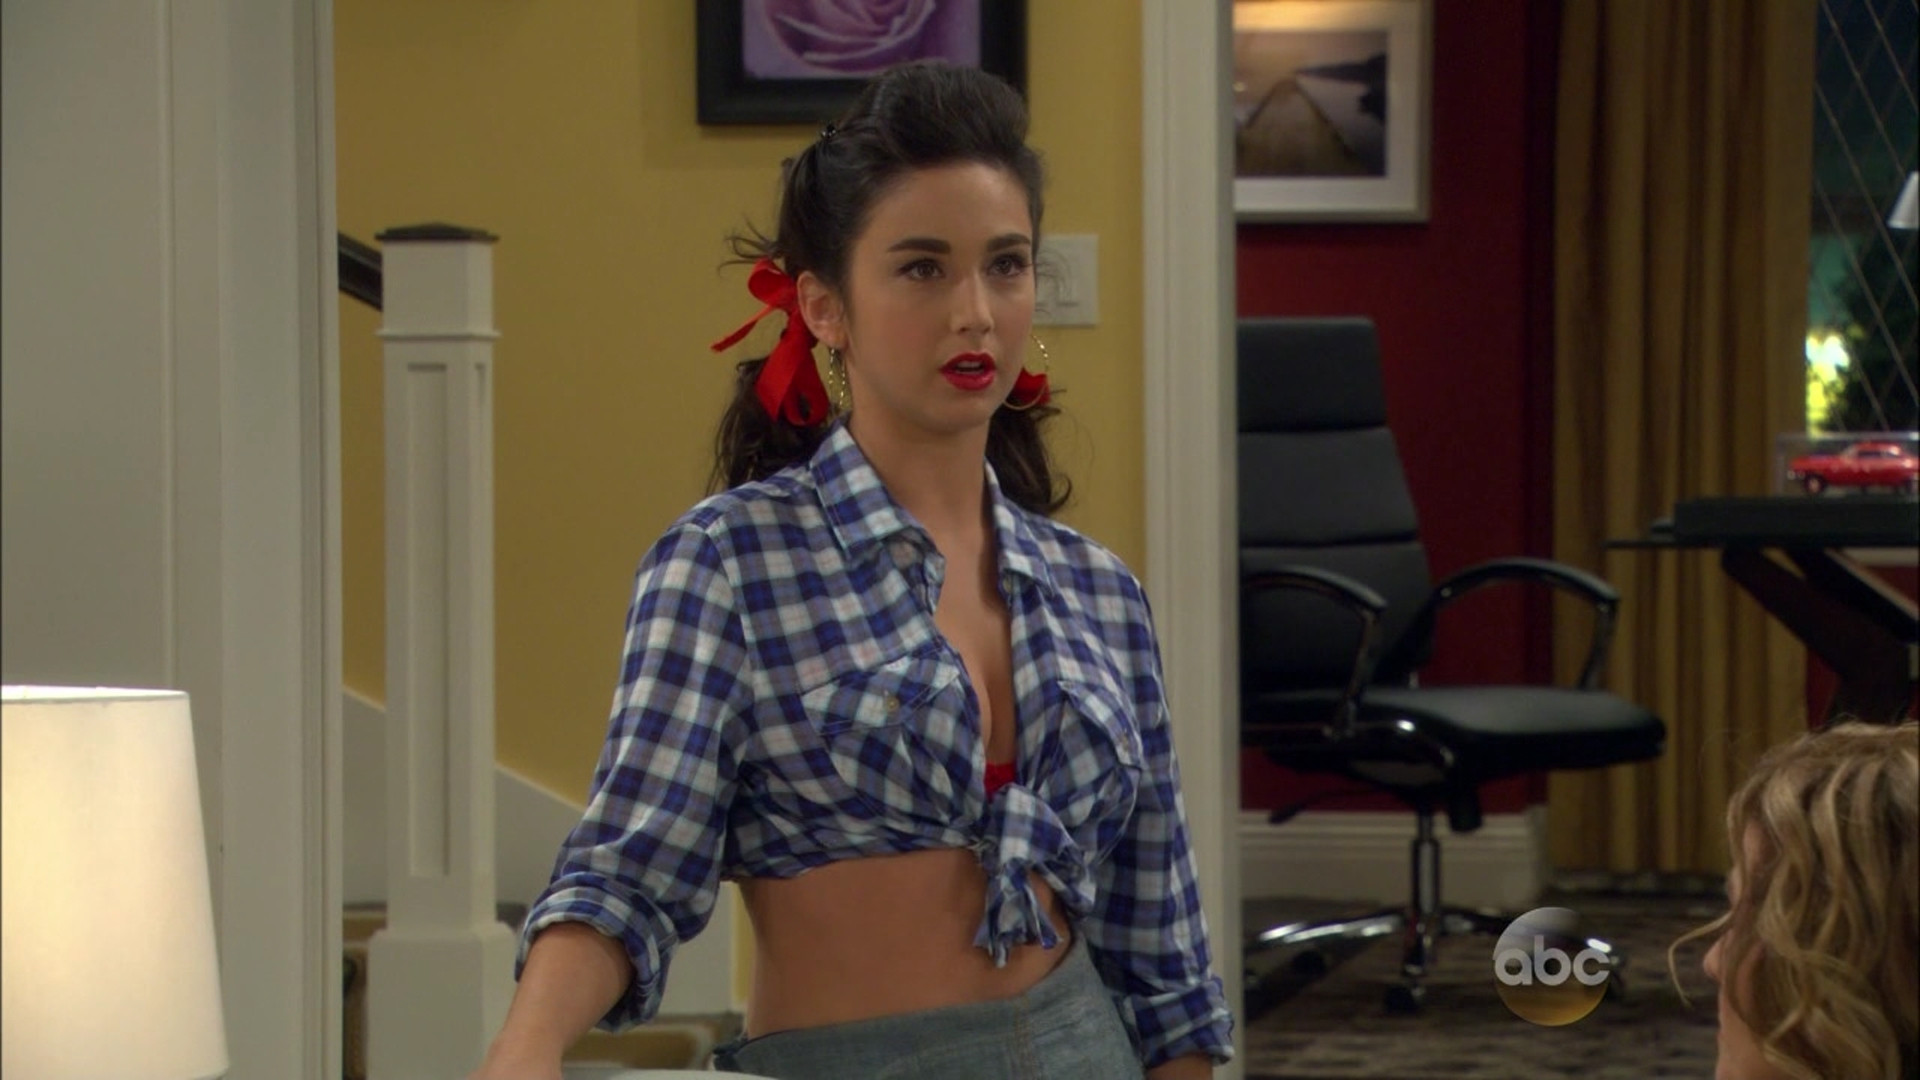 More Pictures Of Molly Ephraim. 